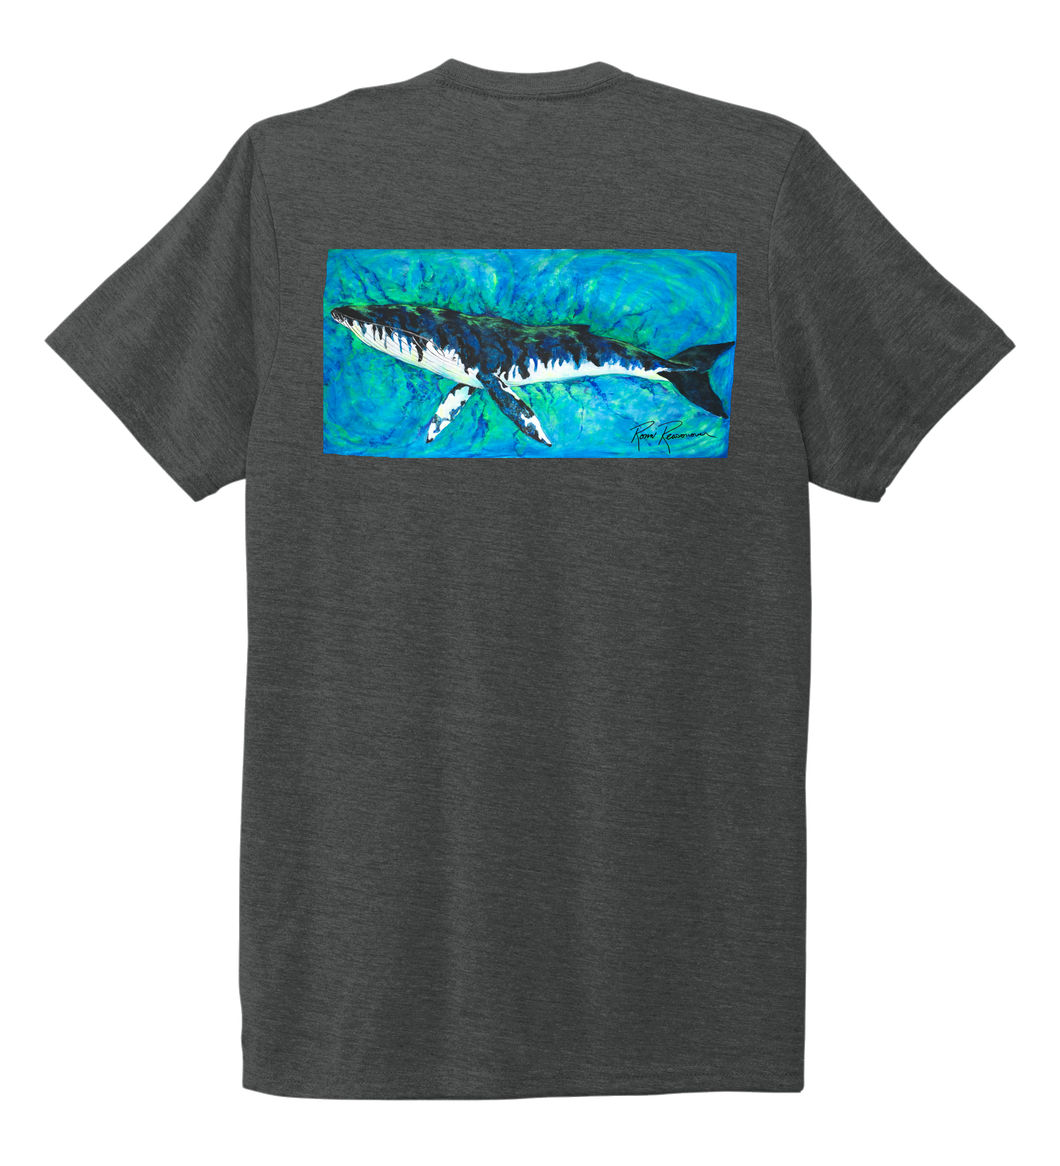 Ronnie Reasonover, The Whale, Crew Neck T-Shirt in Slate Black